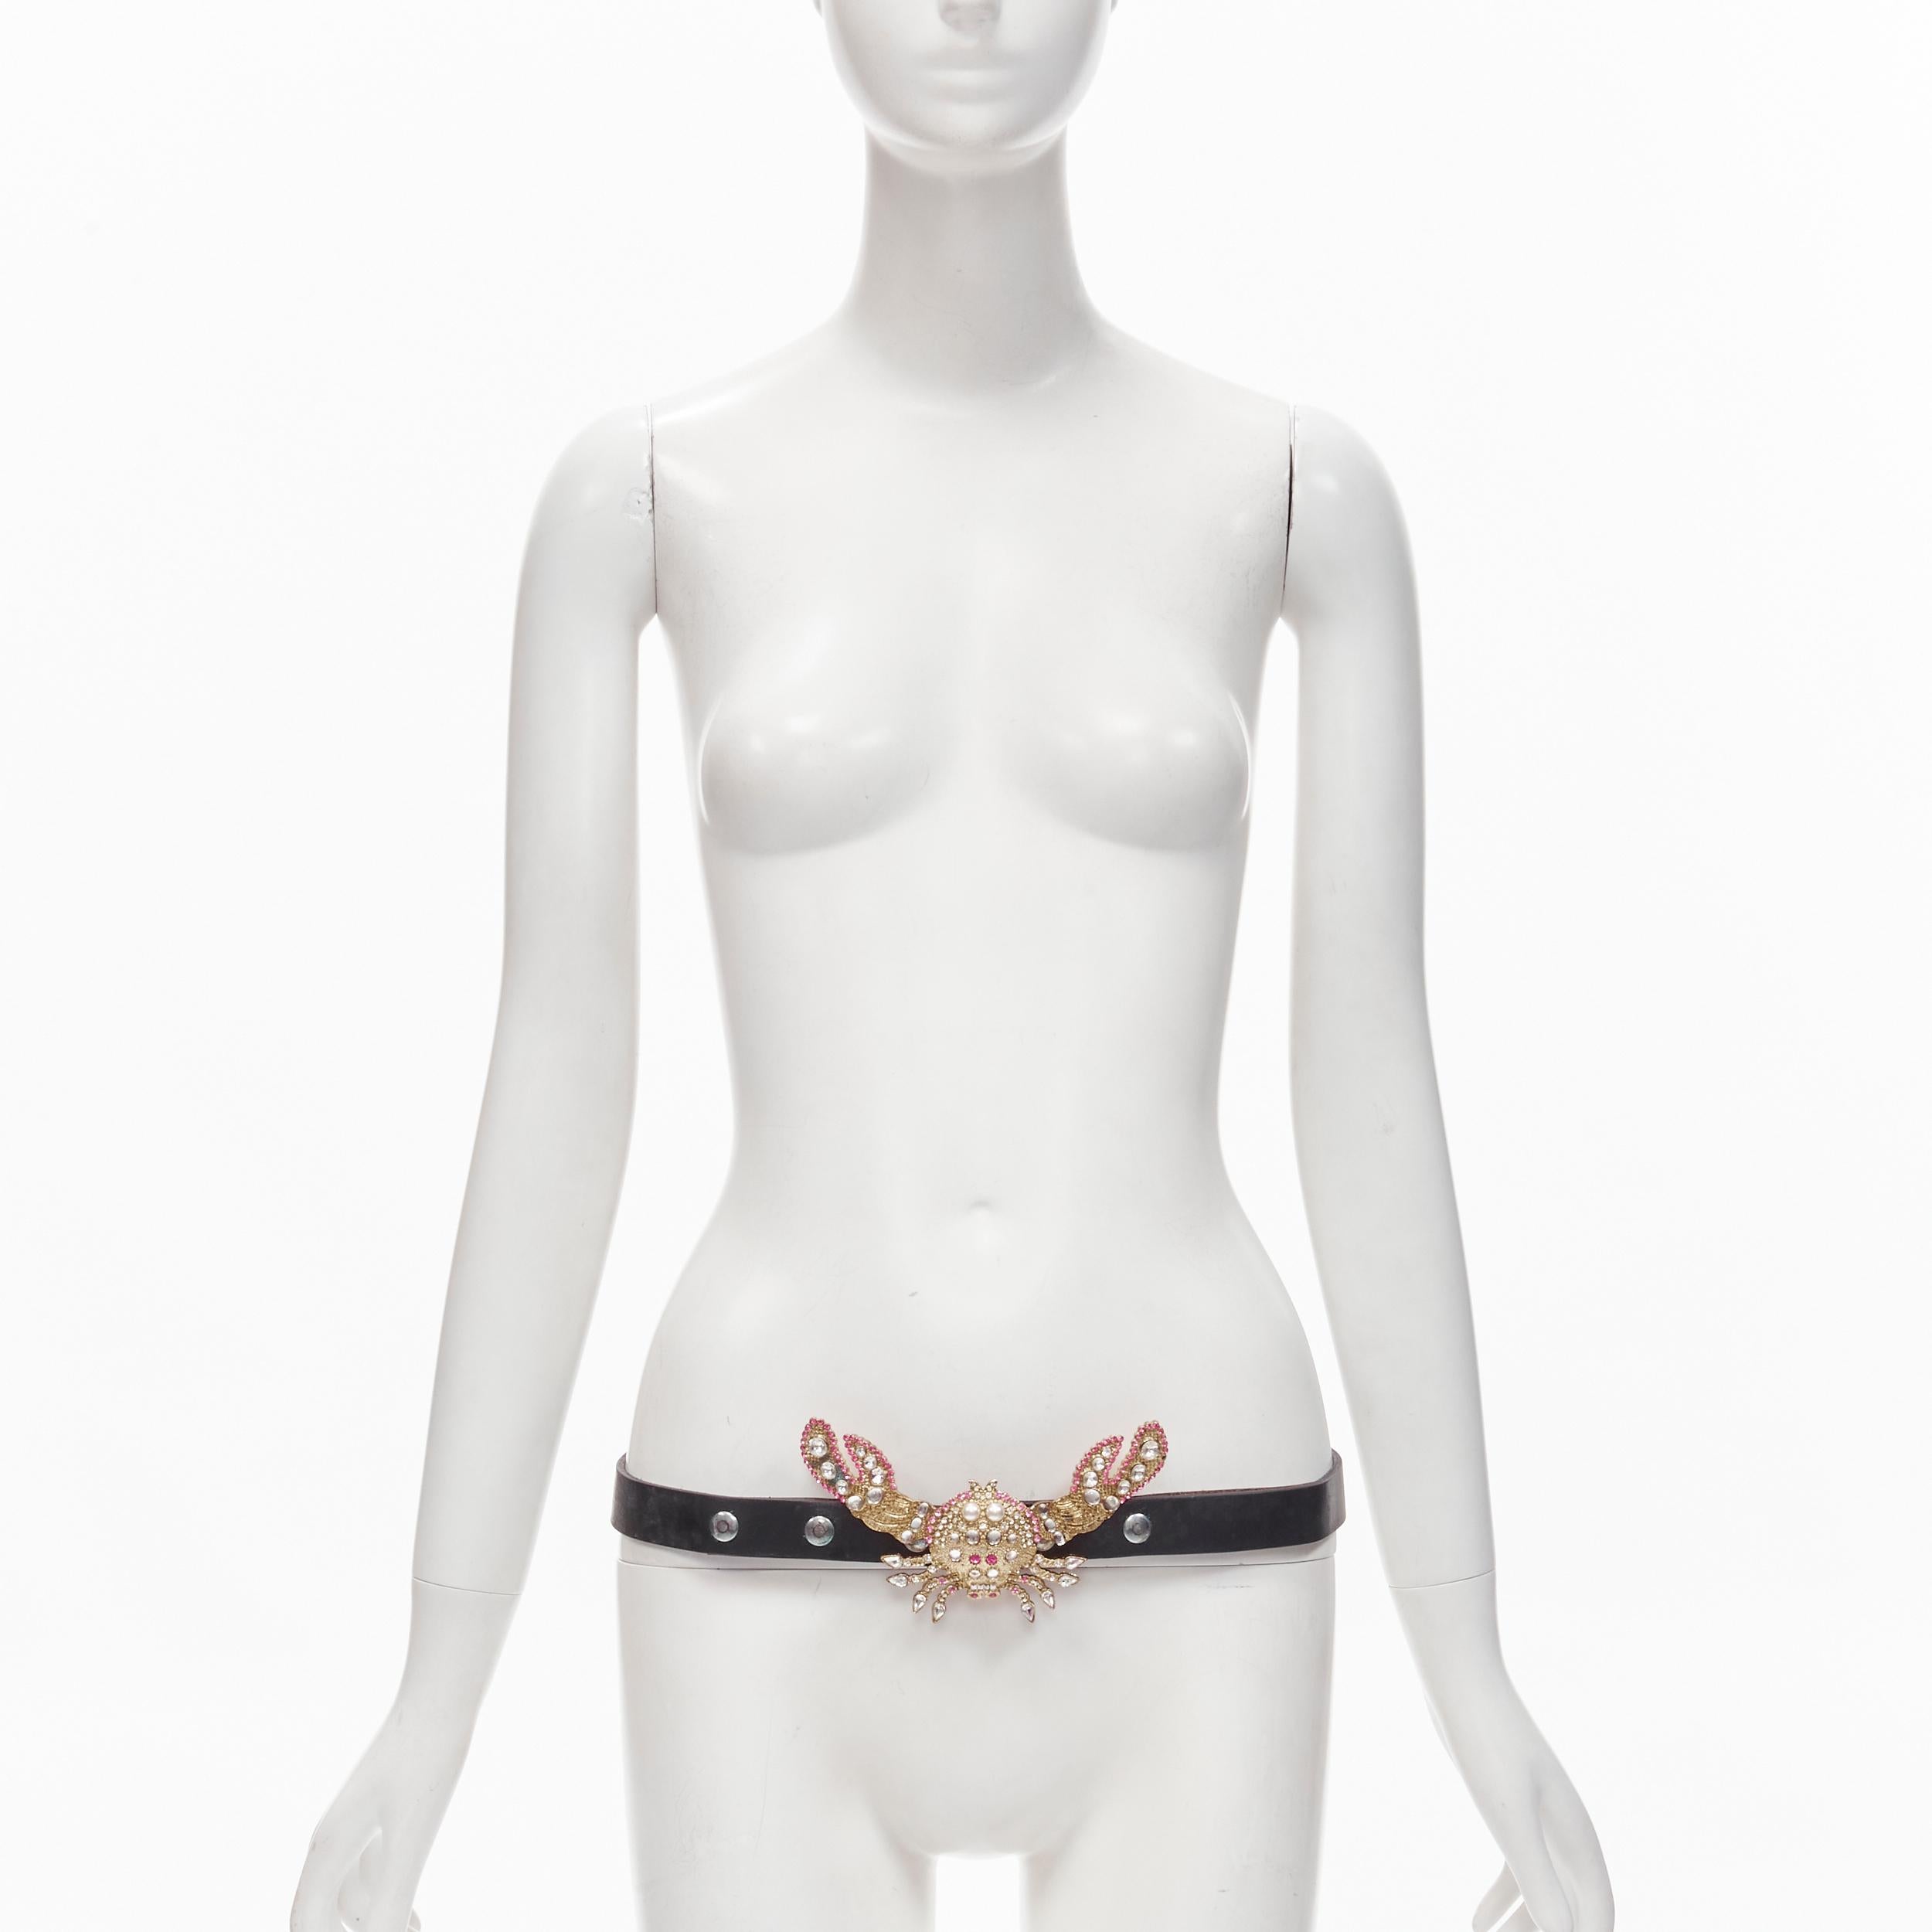 DSQUARED2 2005 Runway gold pink crystal embellsihed crab black leather belt
Brand: Dsquared2
Collection: 2005 Runway
Material: Metal
Color: Black
Pattern: Solid
Closure: Button
Made in: Italy

CONDITION:
Condition: Good, this item was pre-owned and